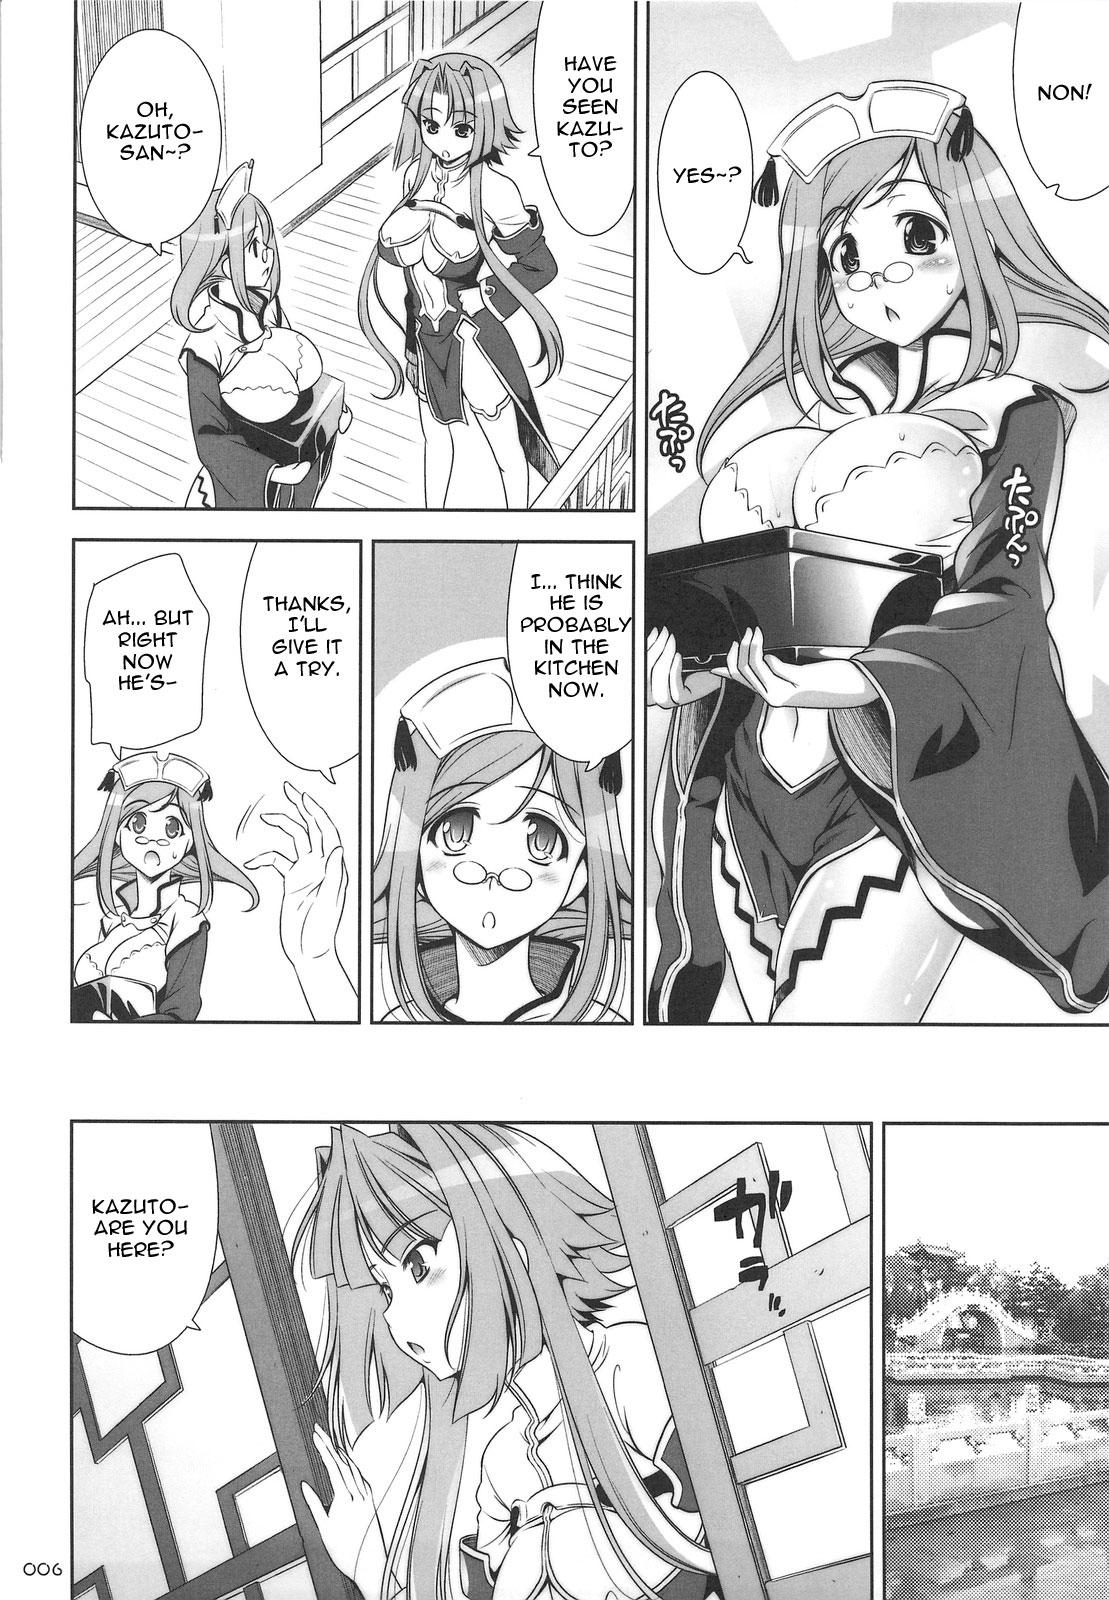 Licking GO! My Way - Koihime musou Trans - Page 5